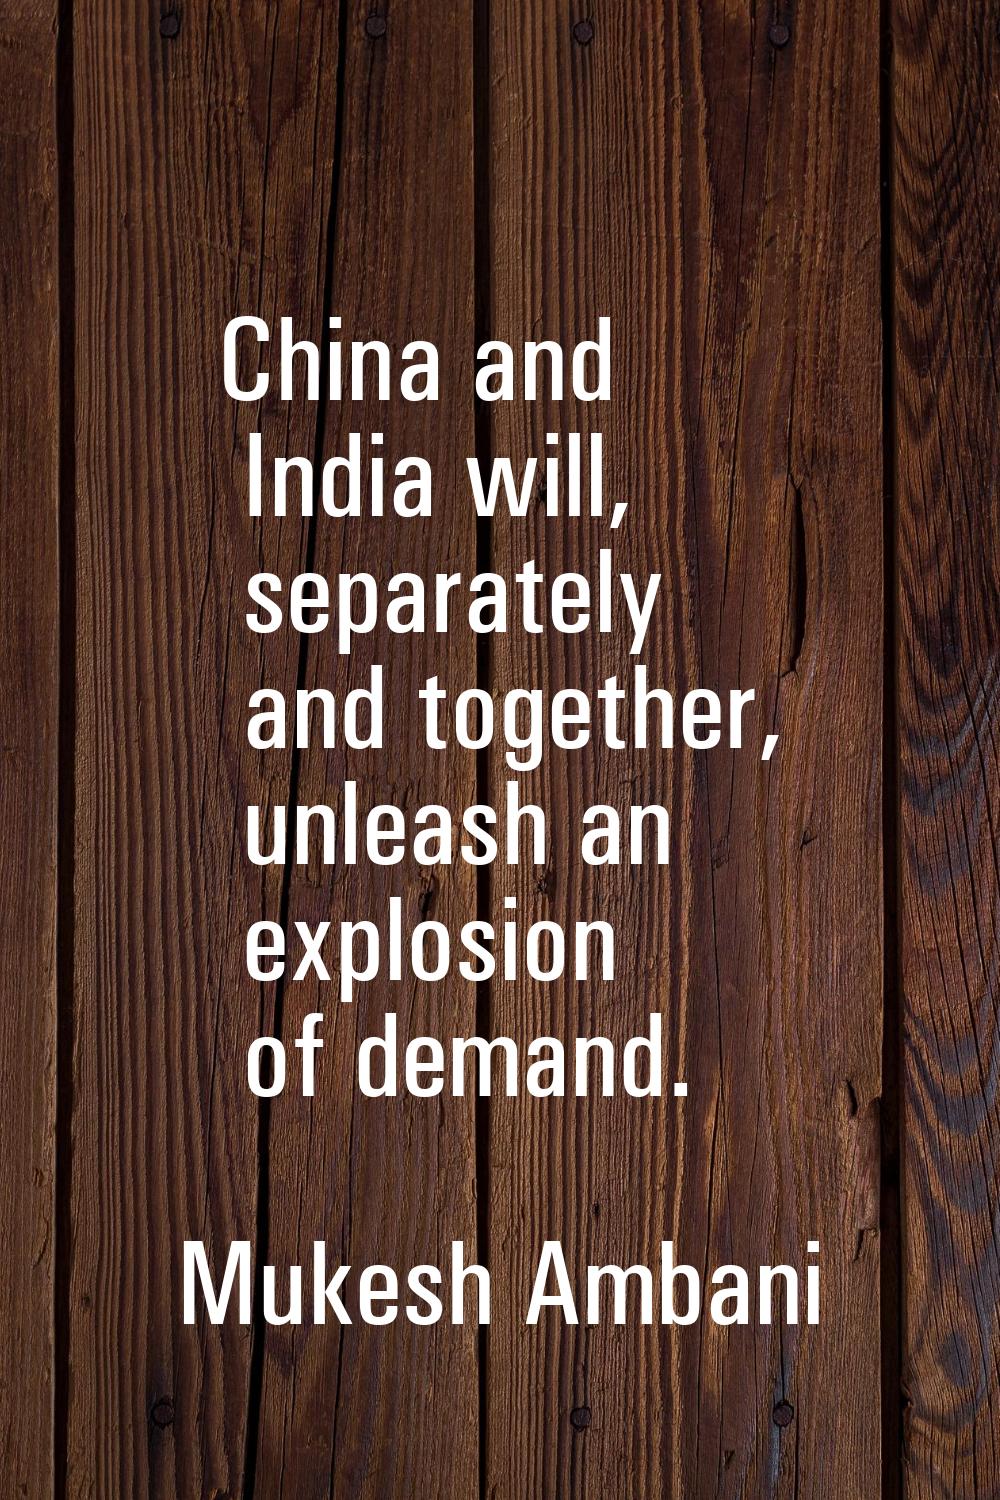 China and India will, separately and together, unleash an explosion of demand.